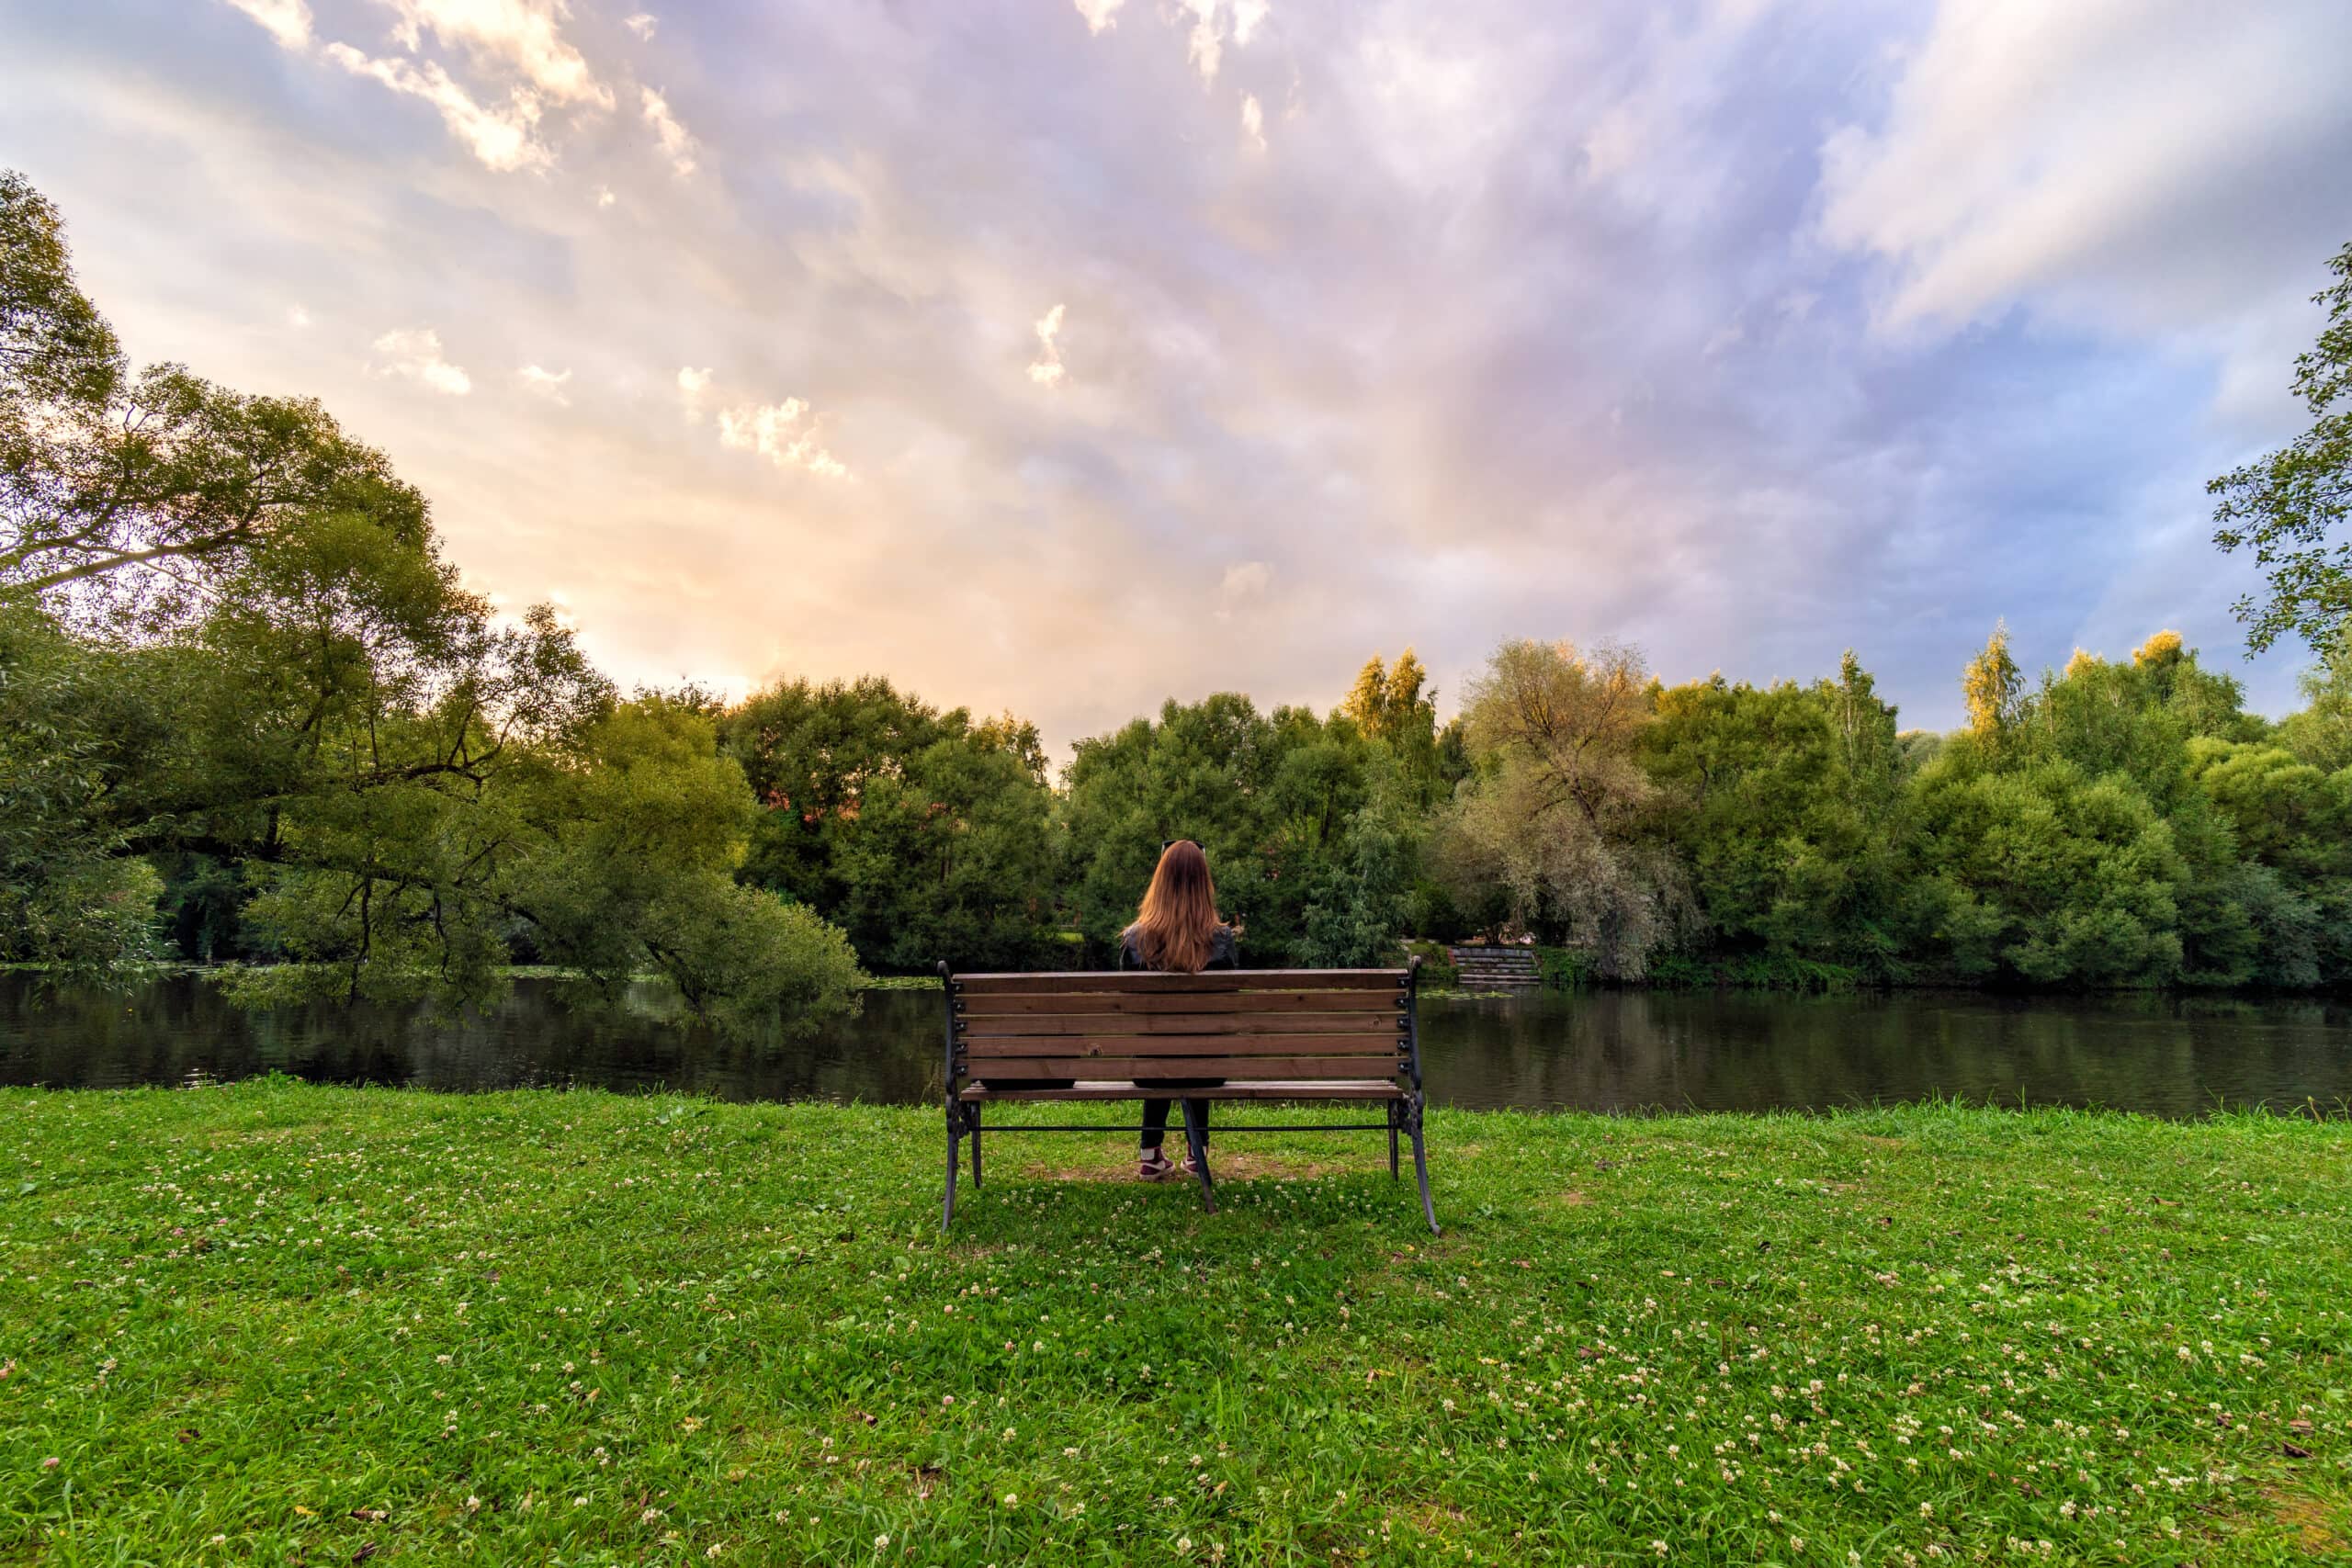 A young woman sits alone on a bench in the park as the sun sets.